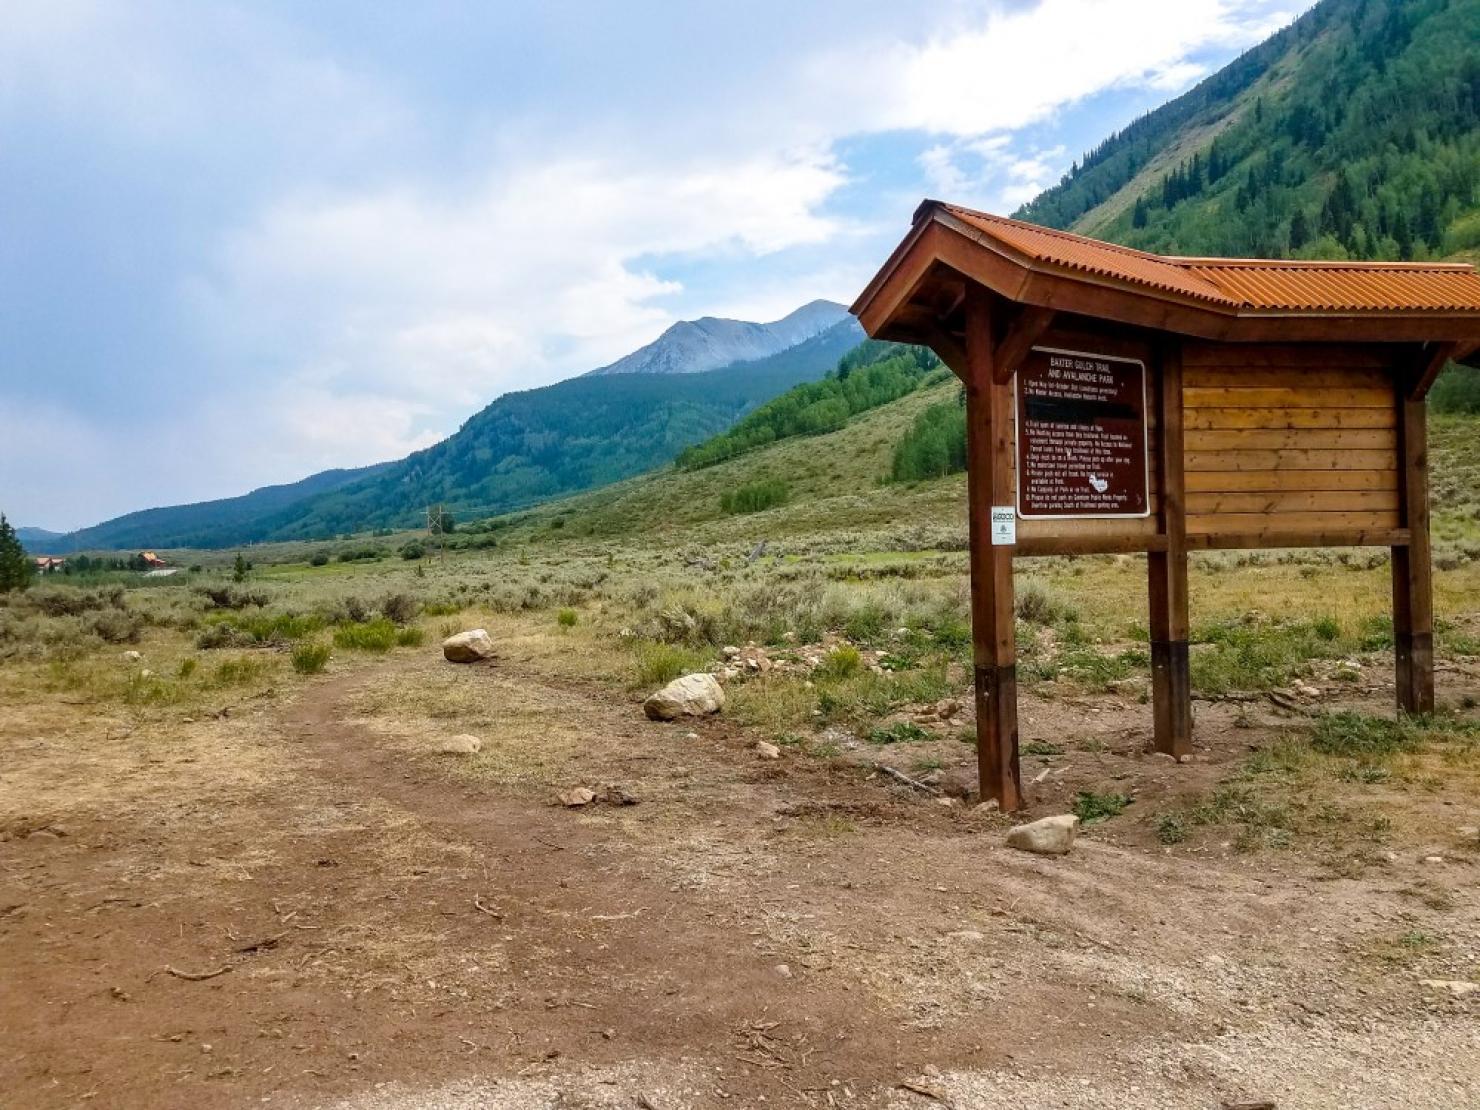 The understated trailhead at Baxter Gulch – a work in progress. Photo by Chris Yuan-Farrell.